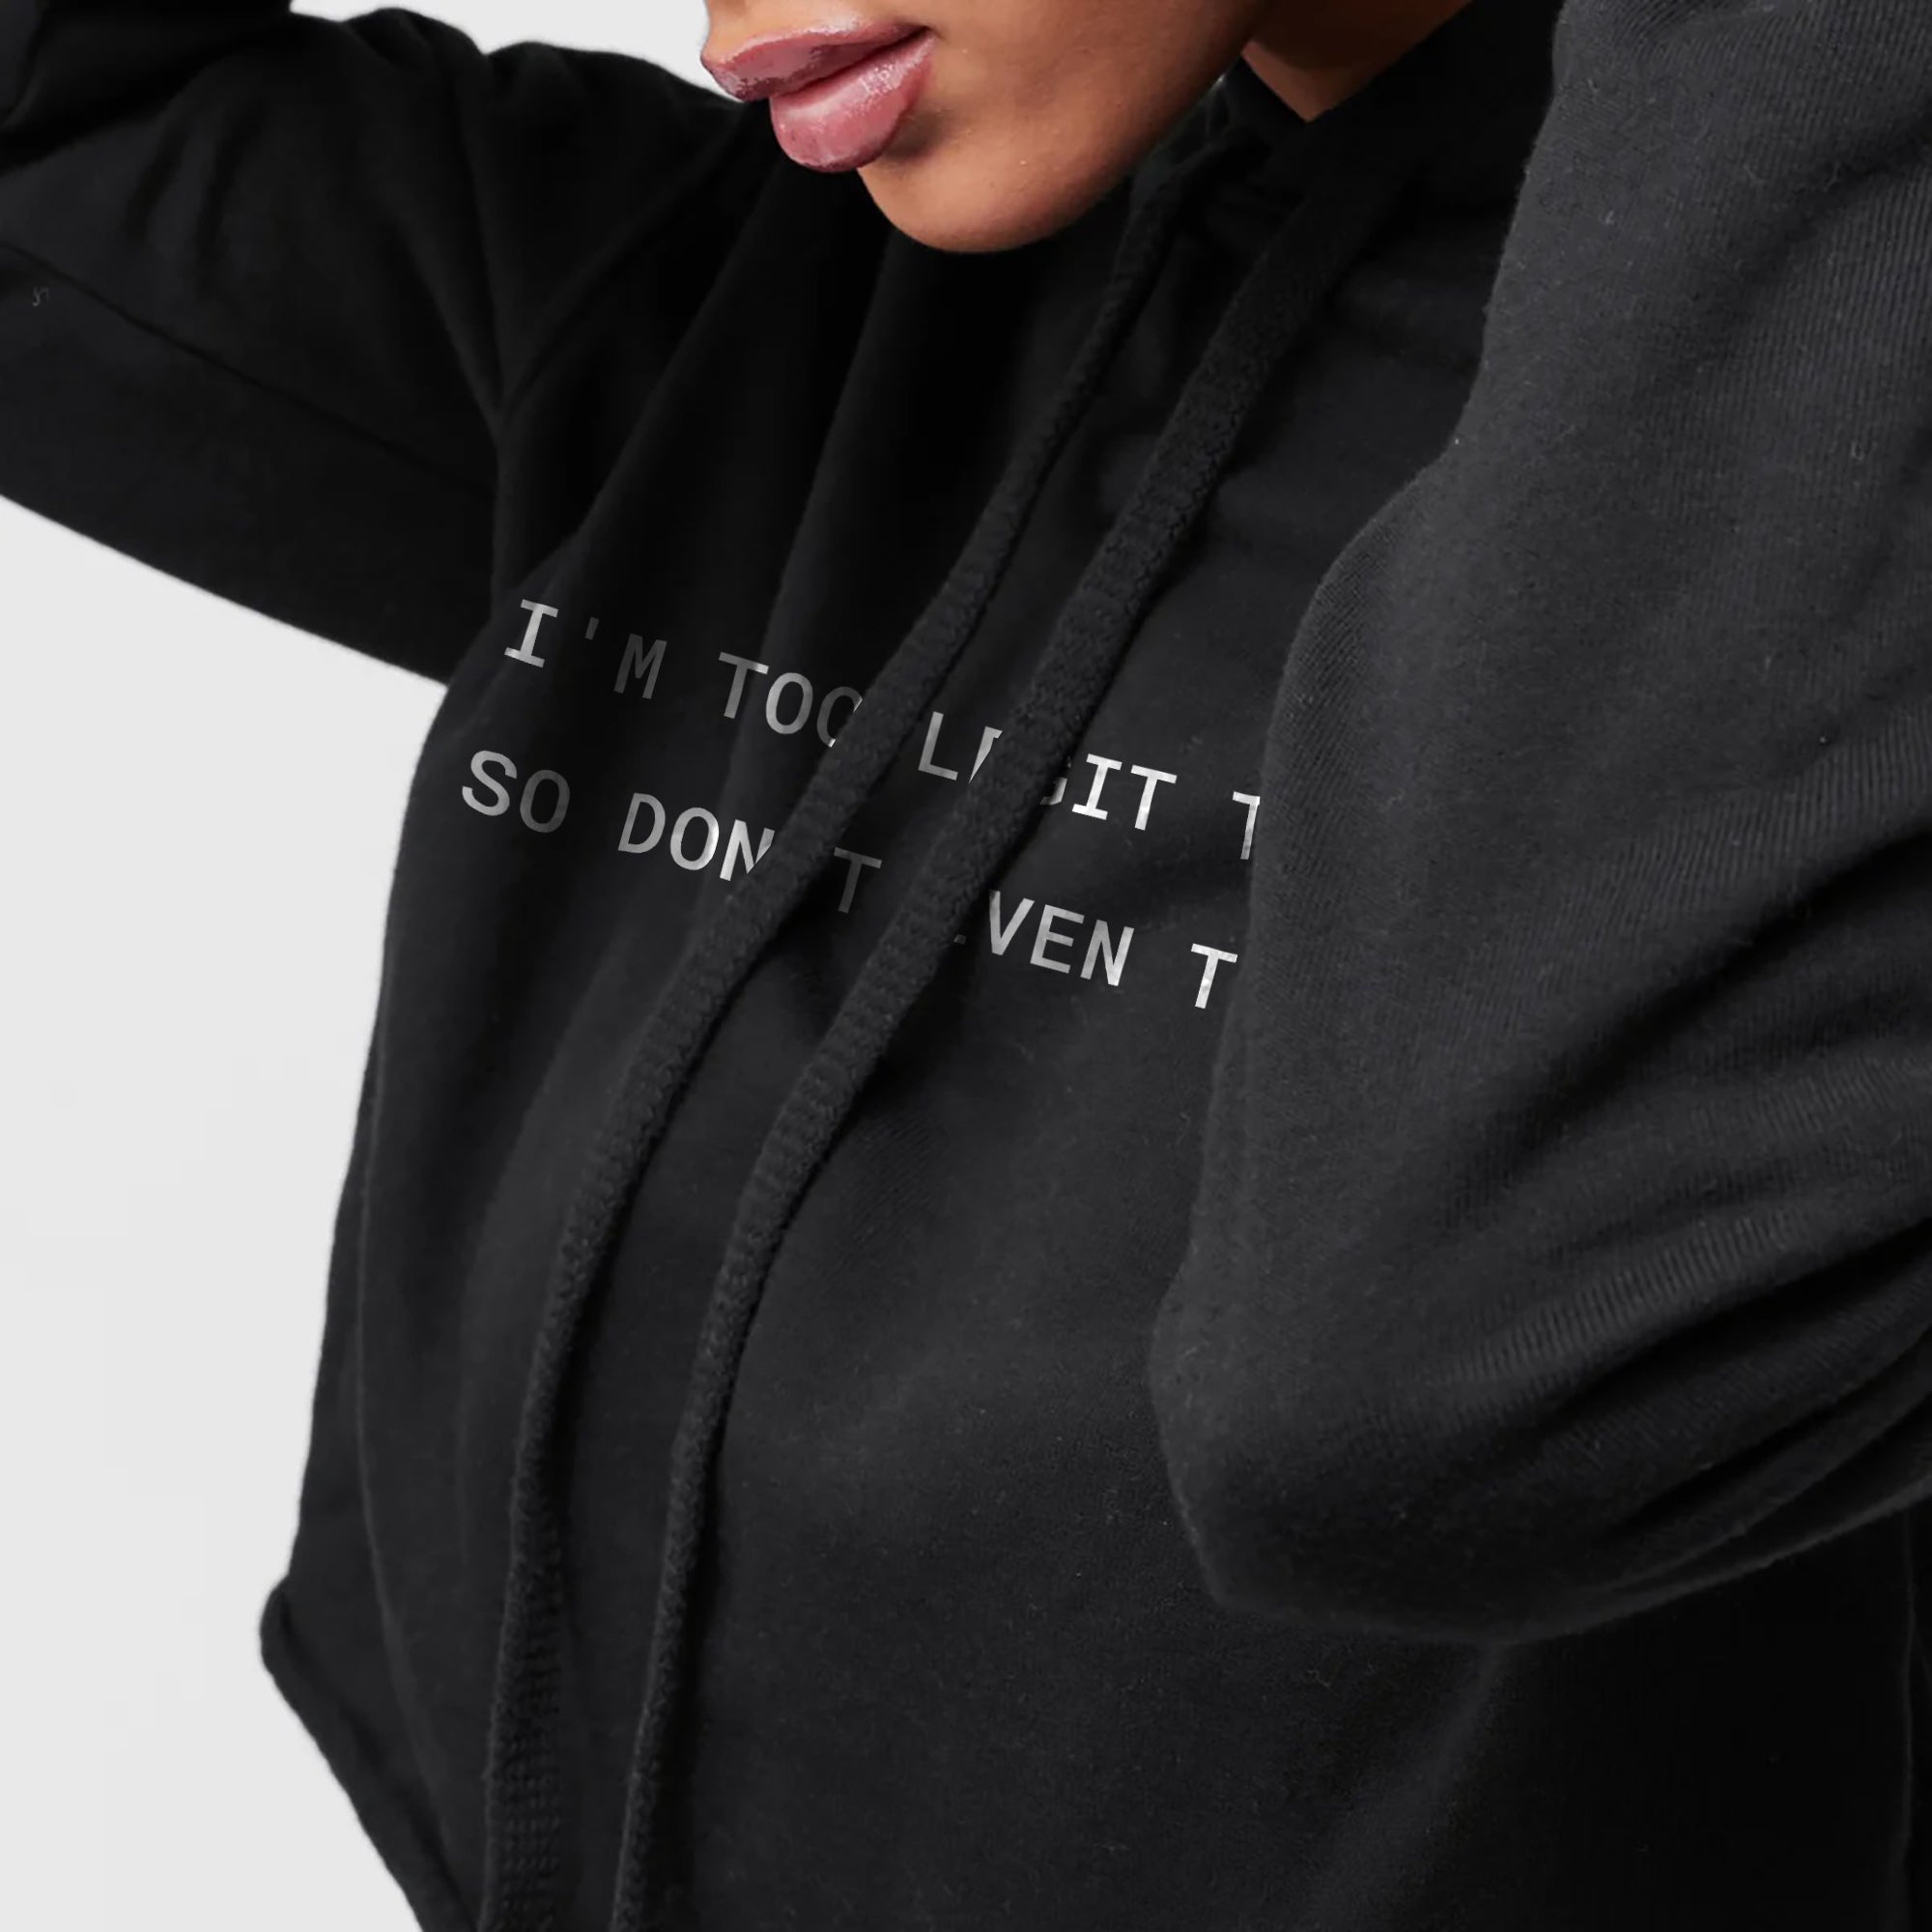 IToo Legit to Quit, So Don't Even Trip Cropped Hoodie Solid Black Closeup Artwork and Texture